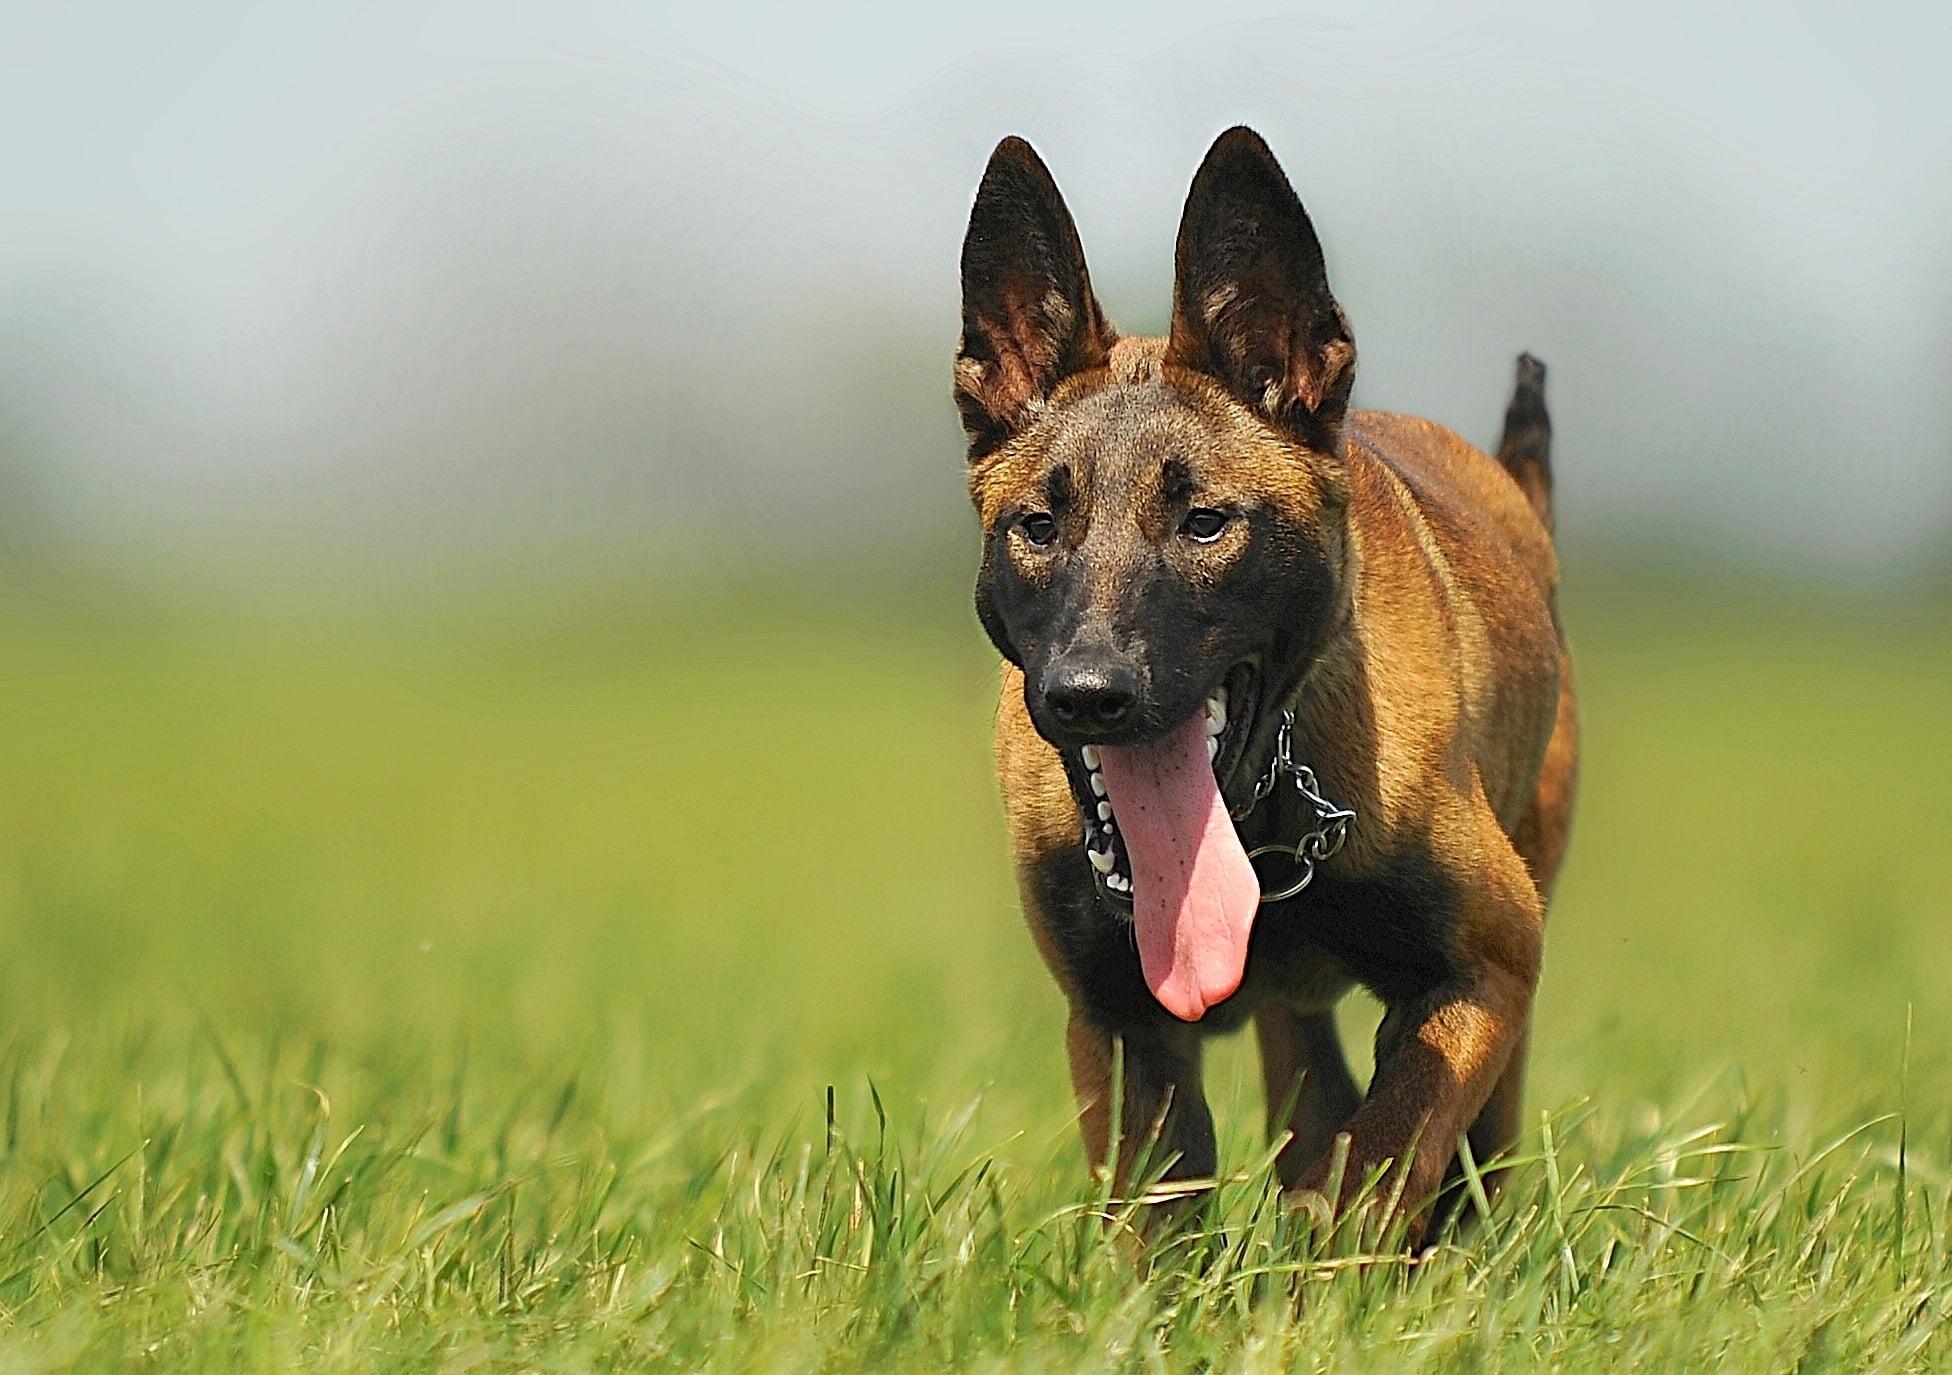 Tan and black Belgian Malinois running on the green grass field